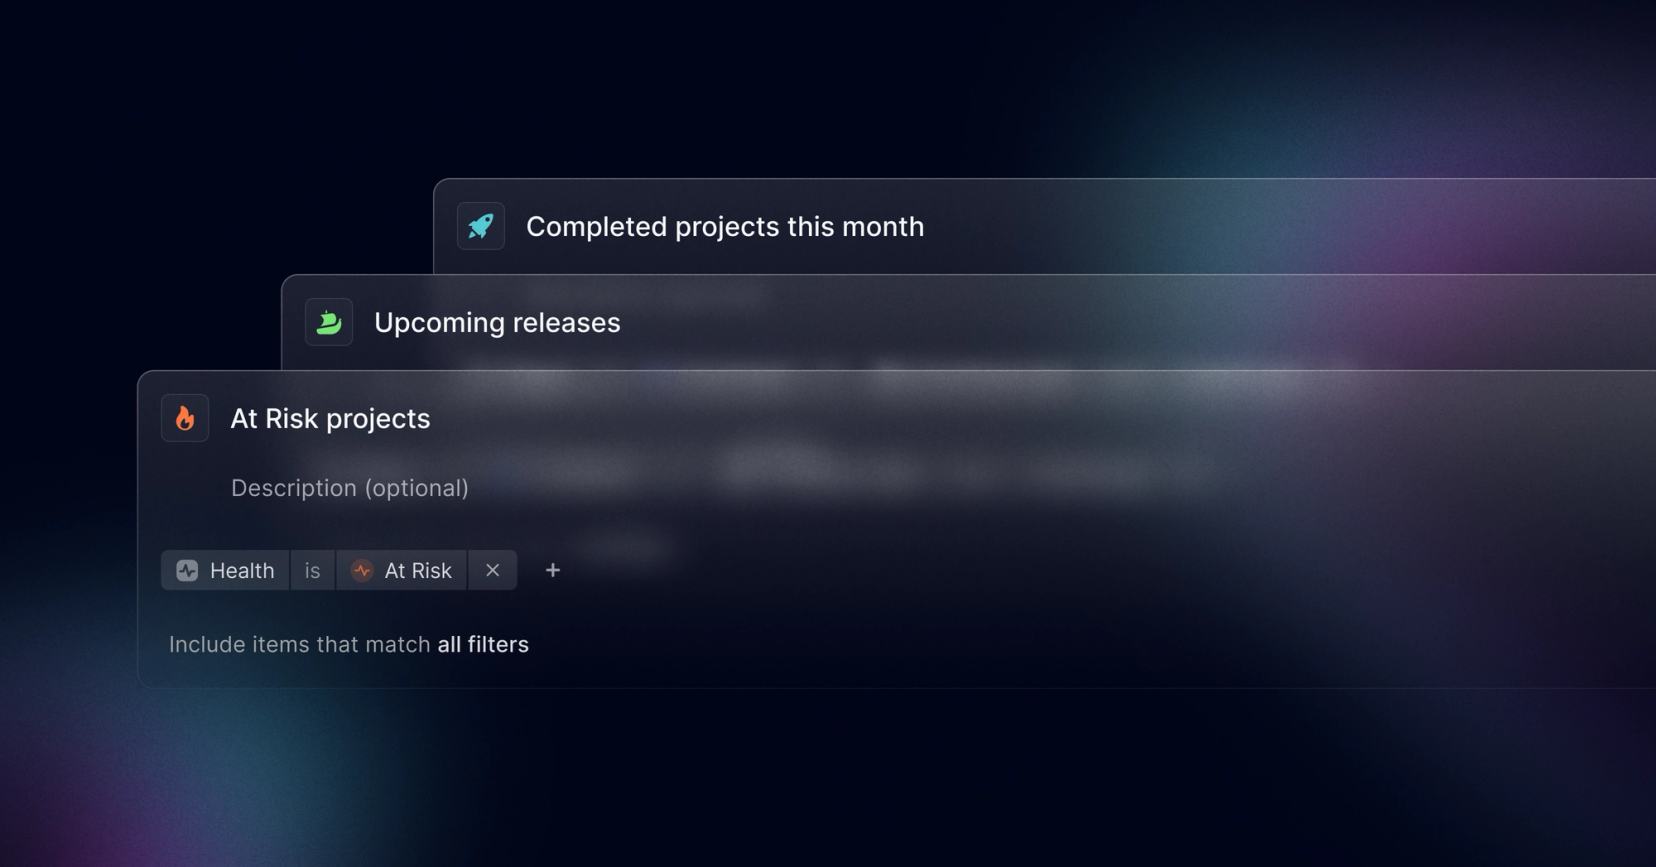 Project views that show At Risk projects, upcoming releases, and completed projects this month